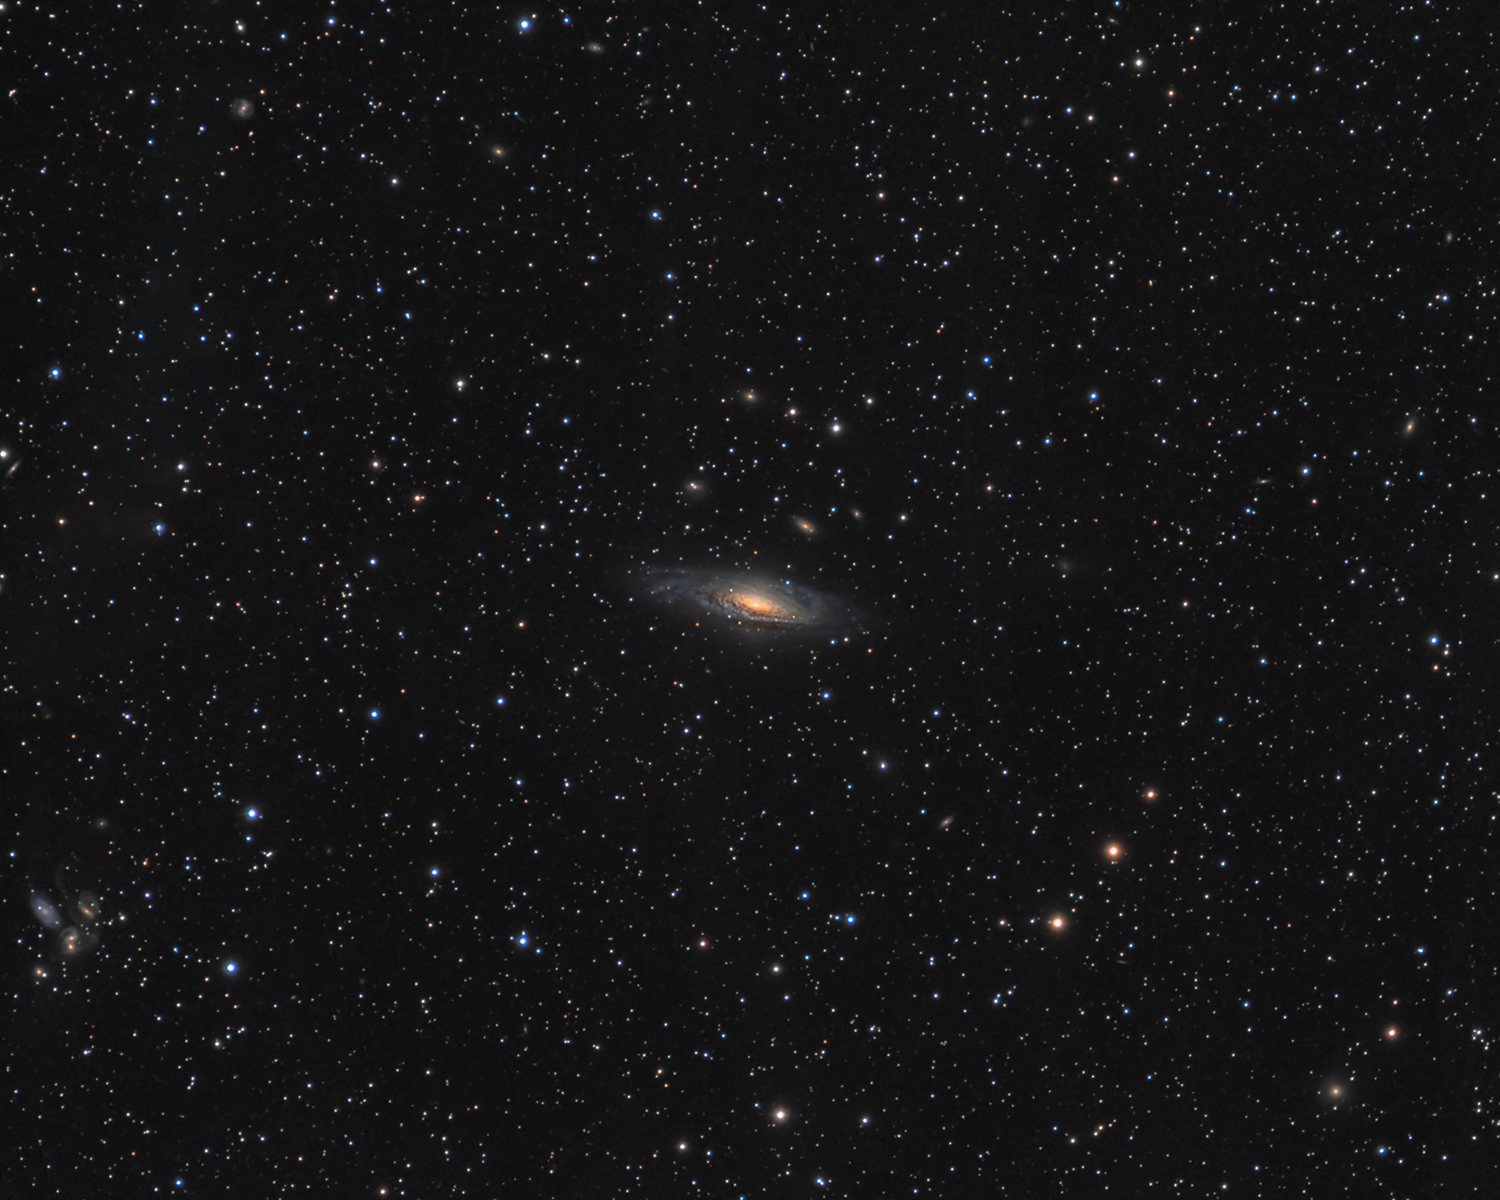 Deer Lick group and Stephan's Quintet